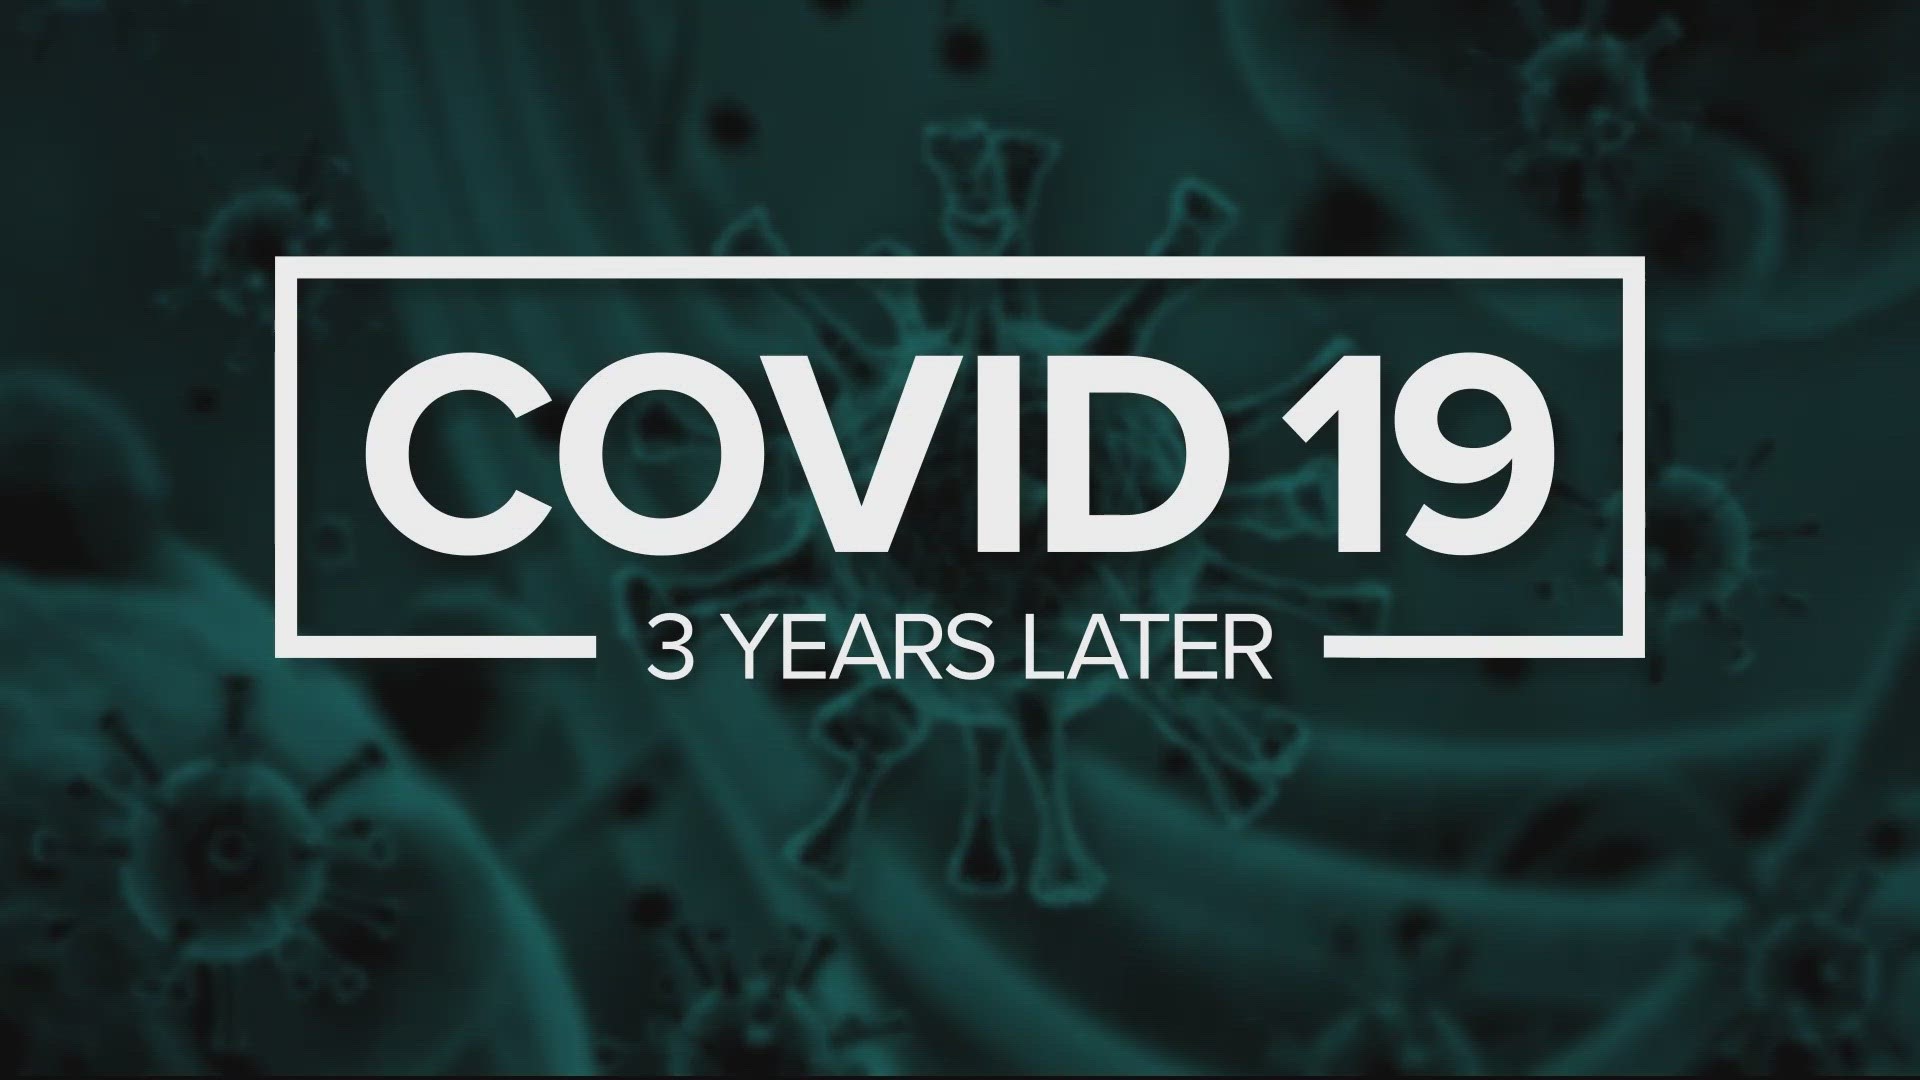 Tomorrow marks three years since the World Health Organization declared the COVID-19 outbreak a pandemic and there are still many unknowns about the long term health